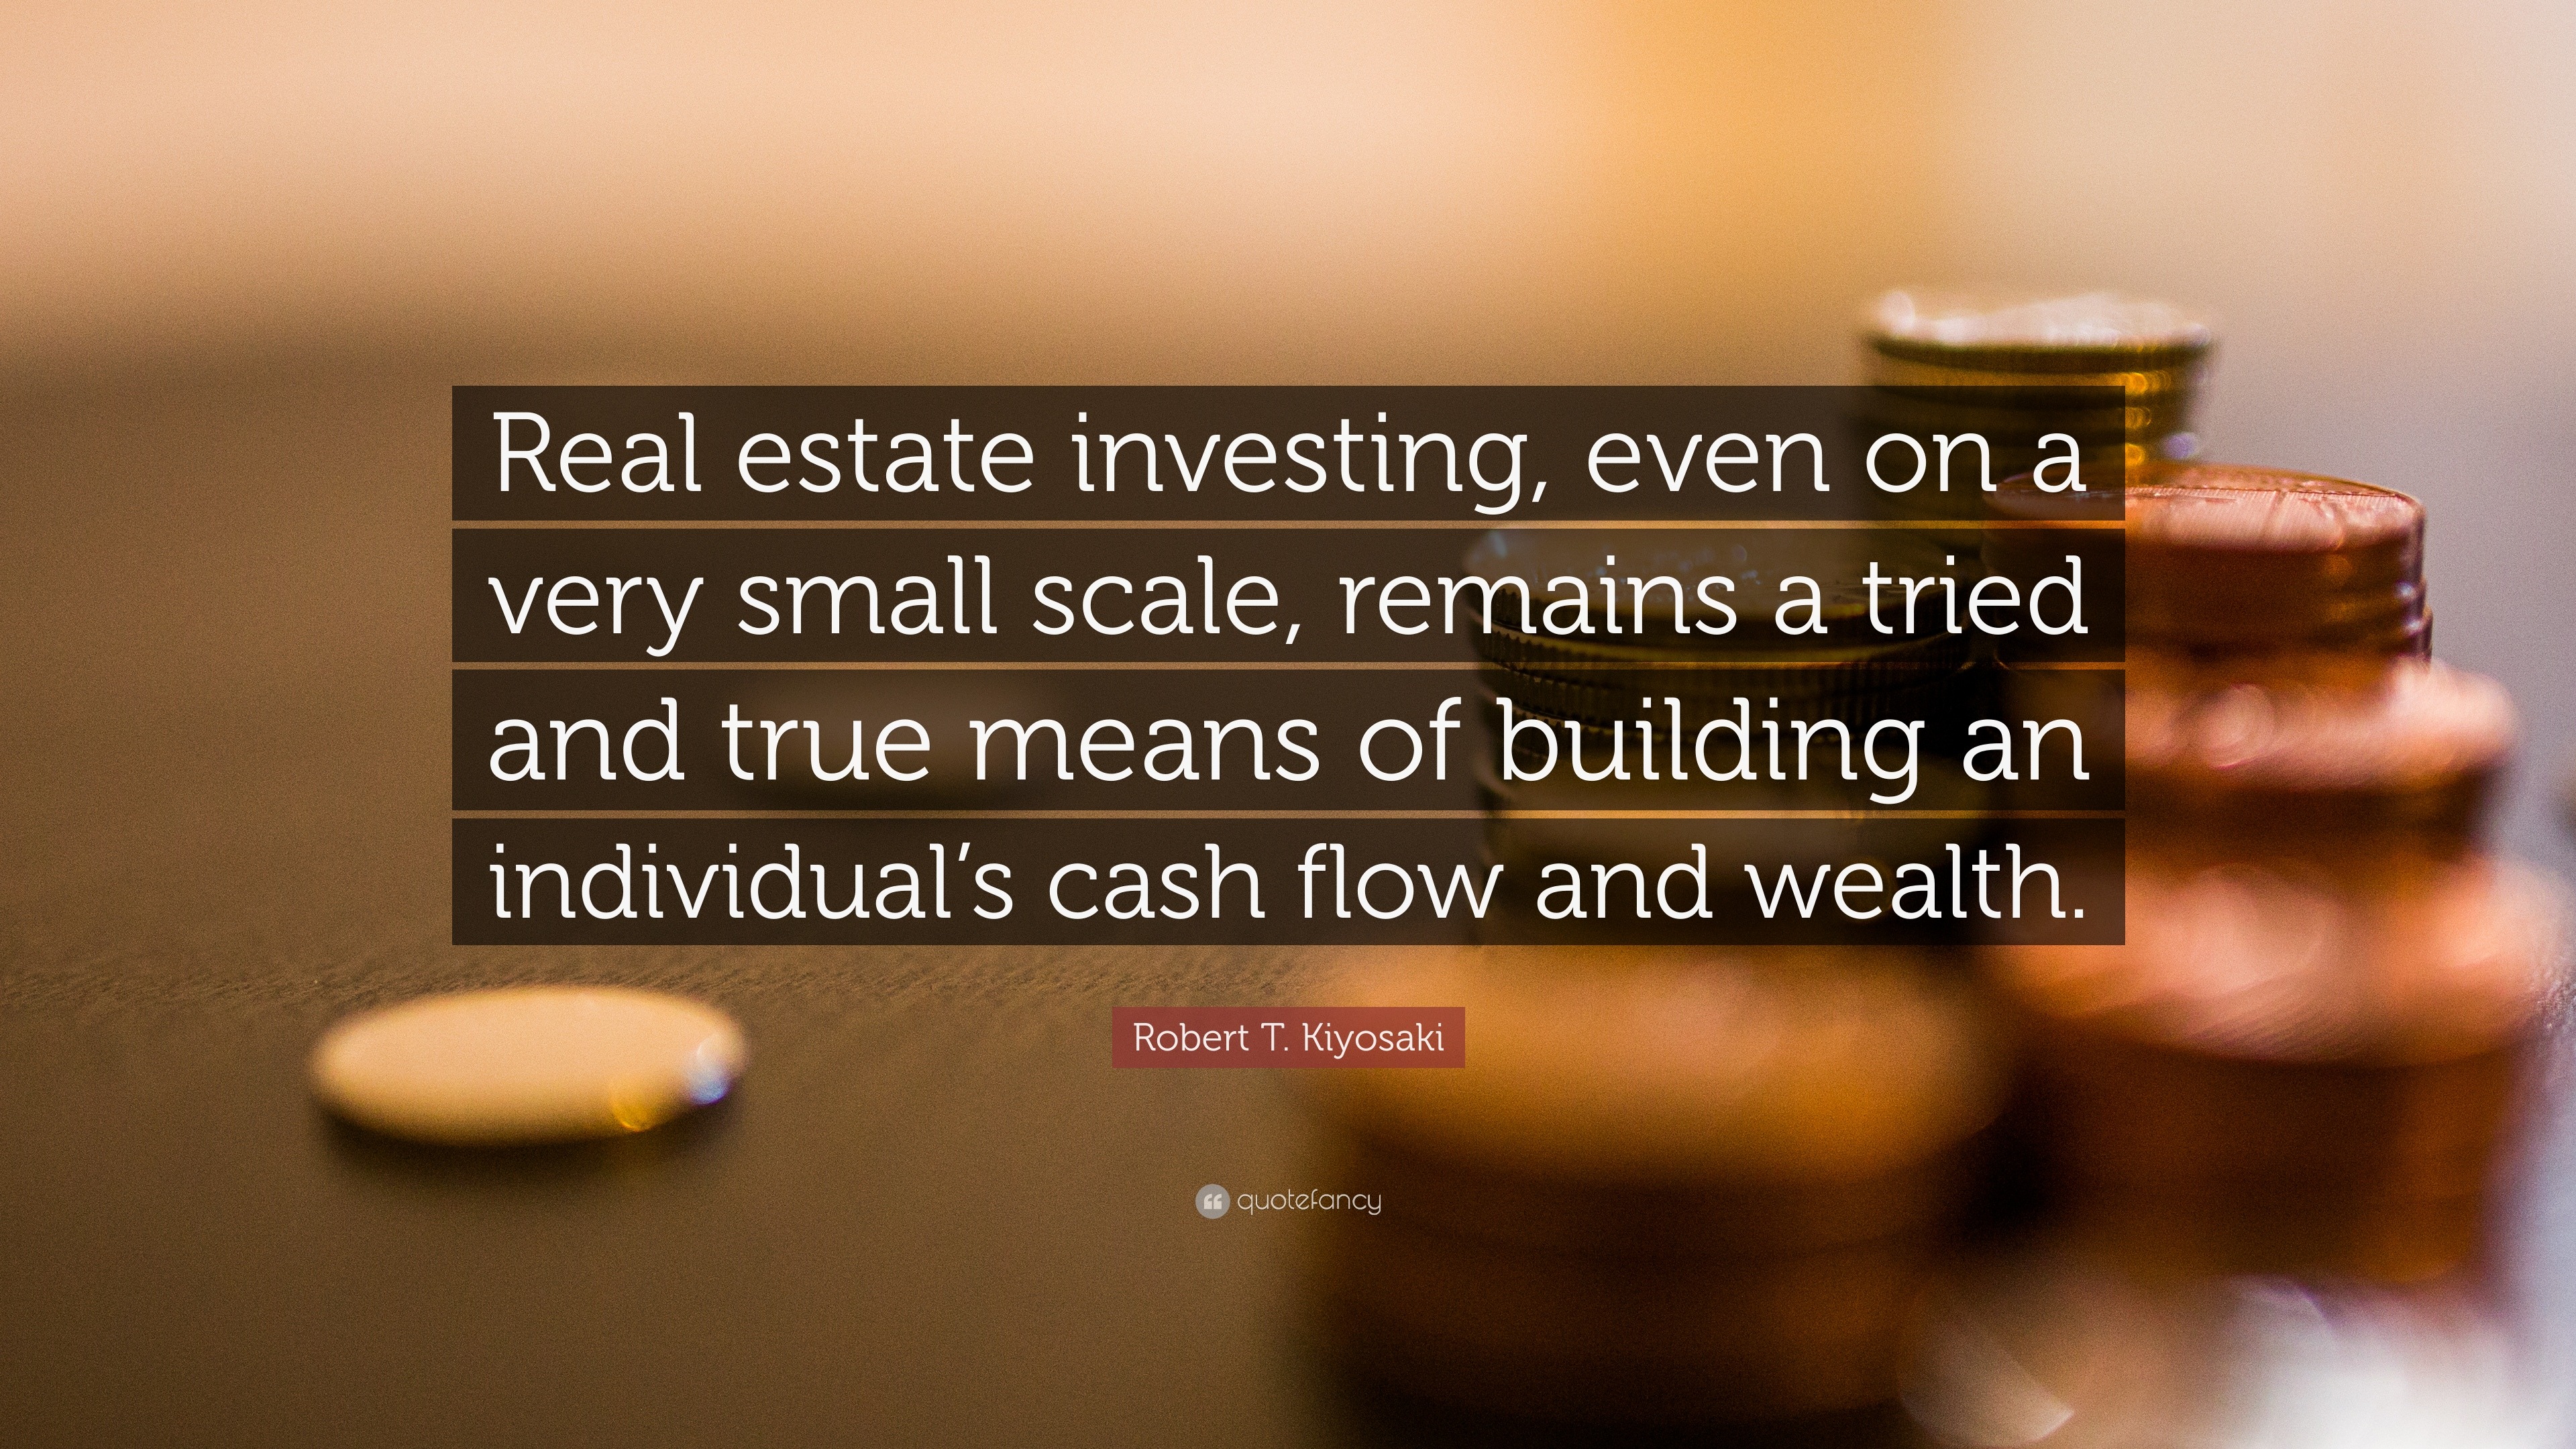 Robert T. Kiyosaki Quote: “Real estate investing, even on a very small